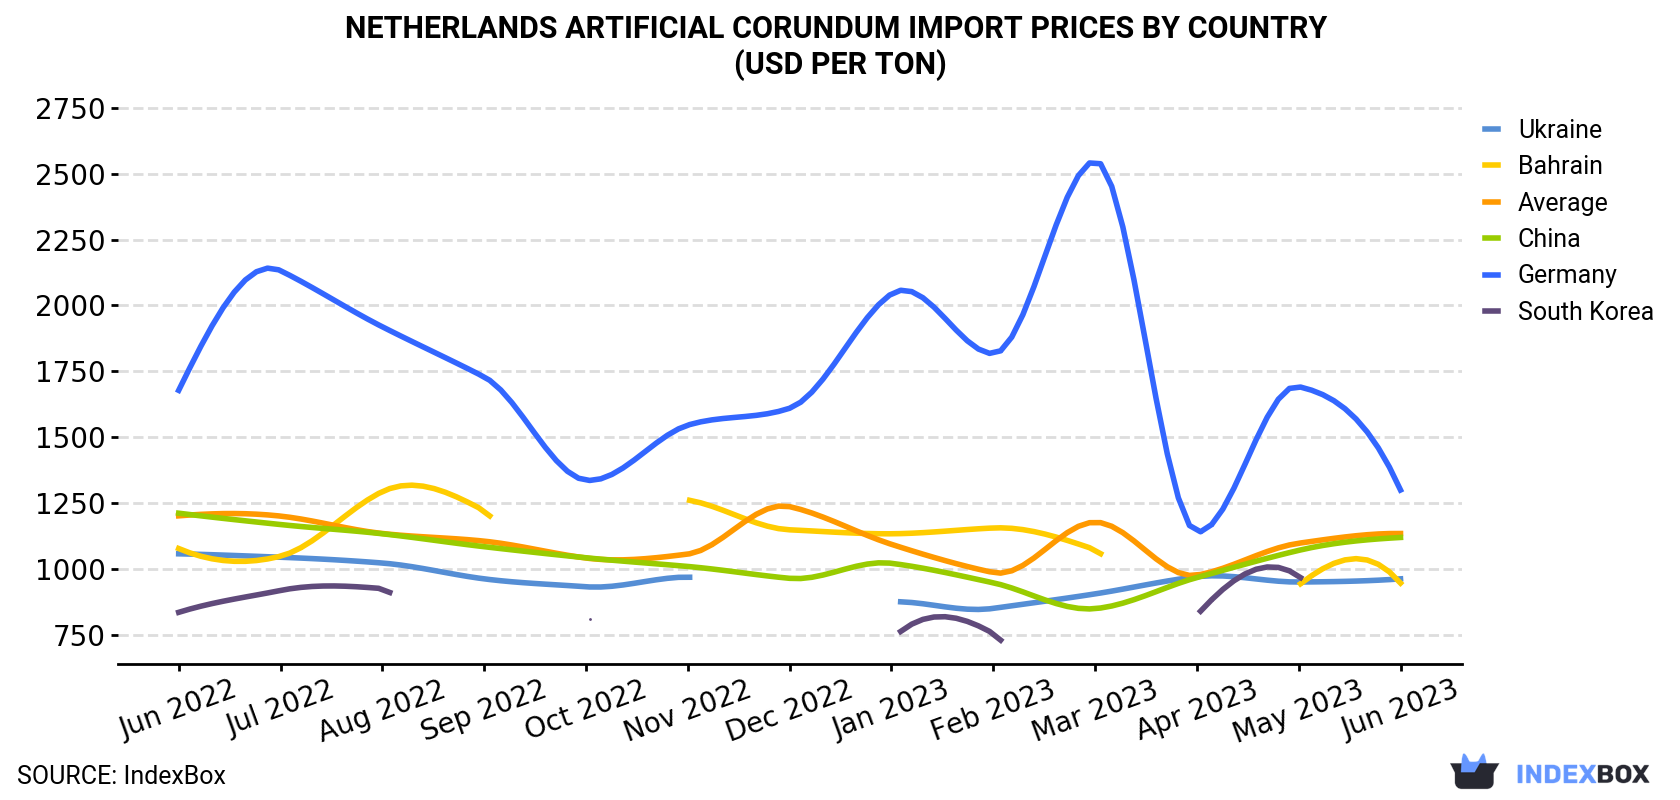 Netherlands Artificial Corundum Import Prices By Country (USD Per Ton)